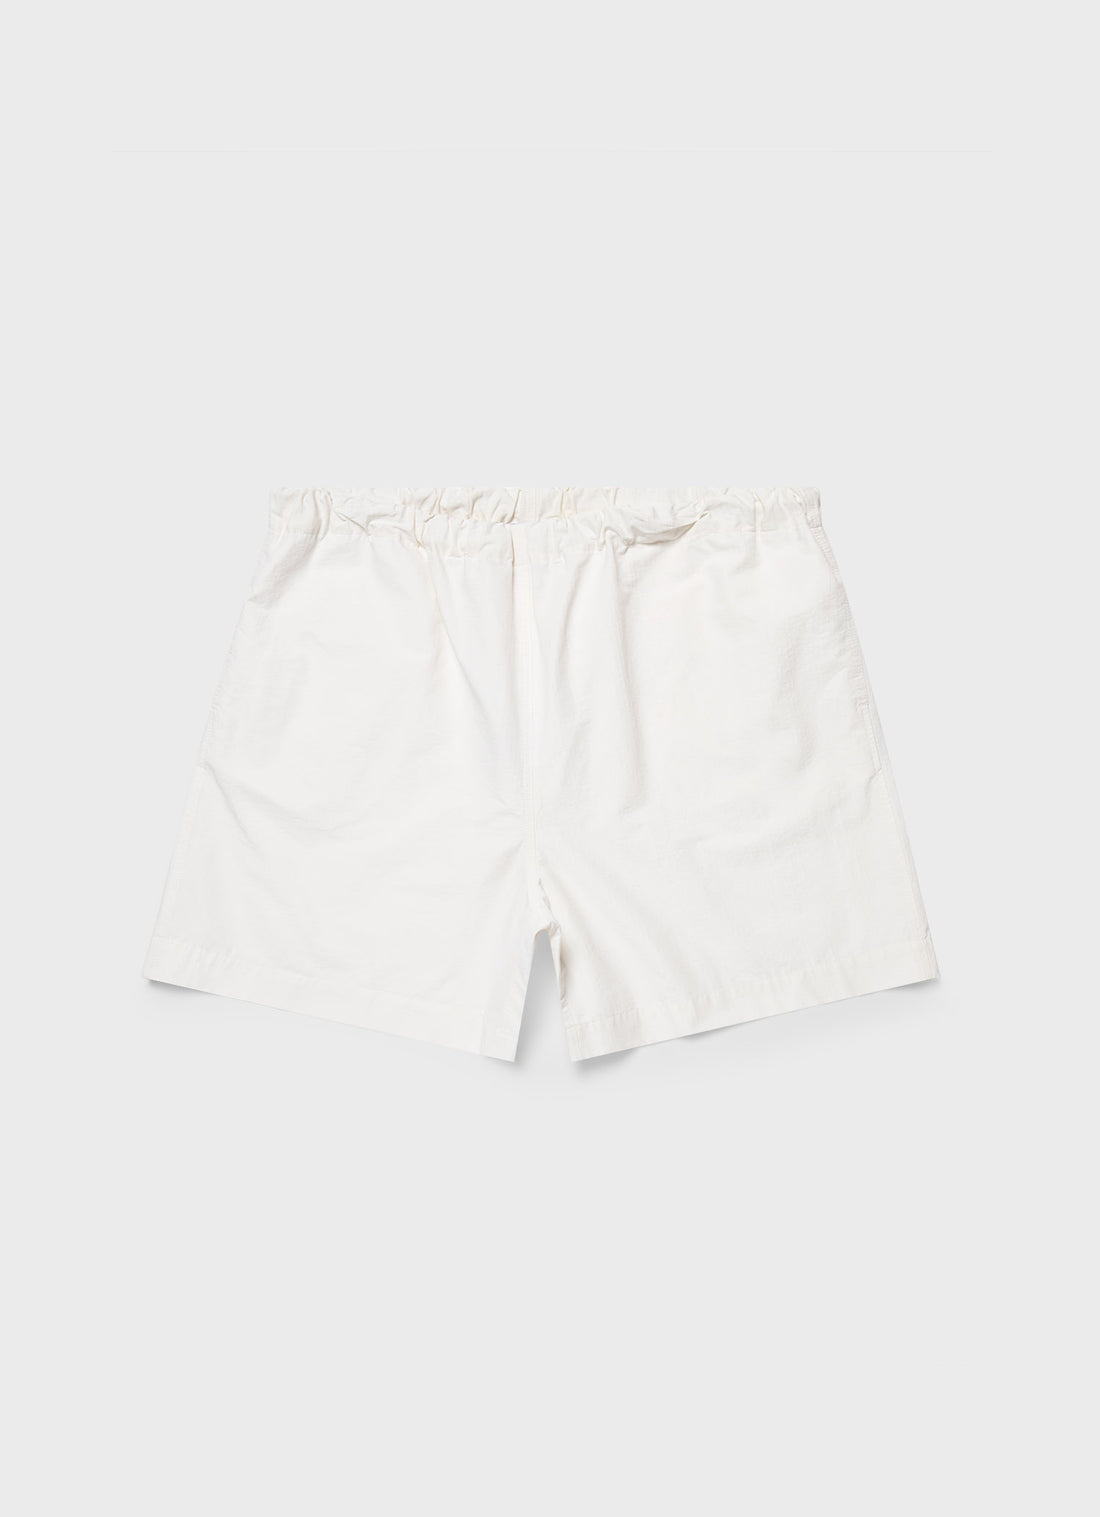 Men's Sunspel x Nigel Cabourn Ripstop Army Short in Off White